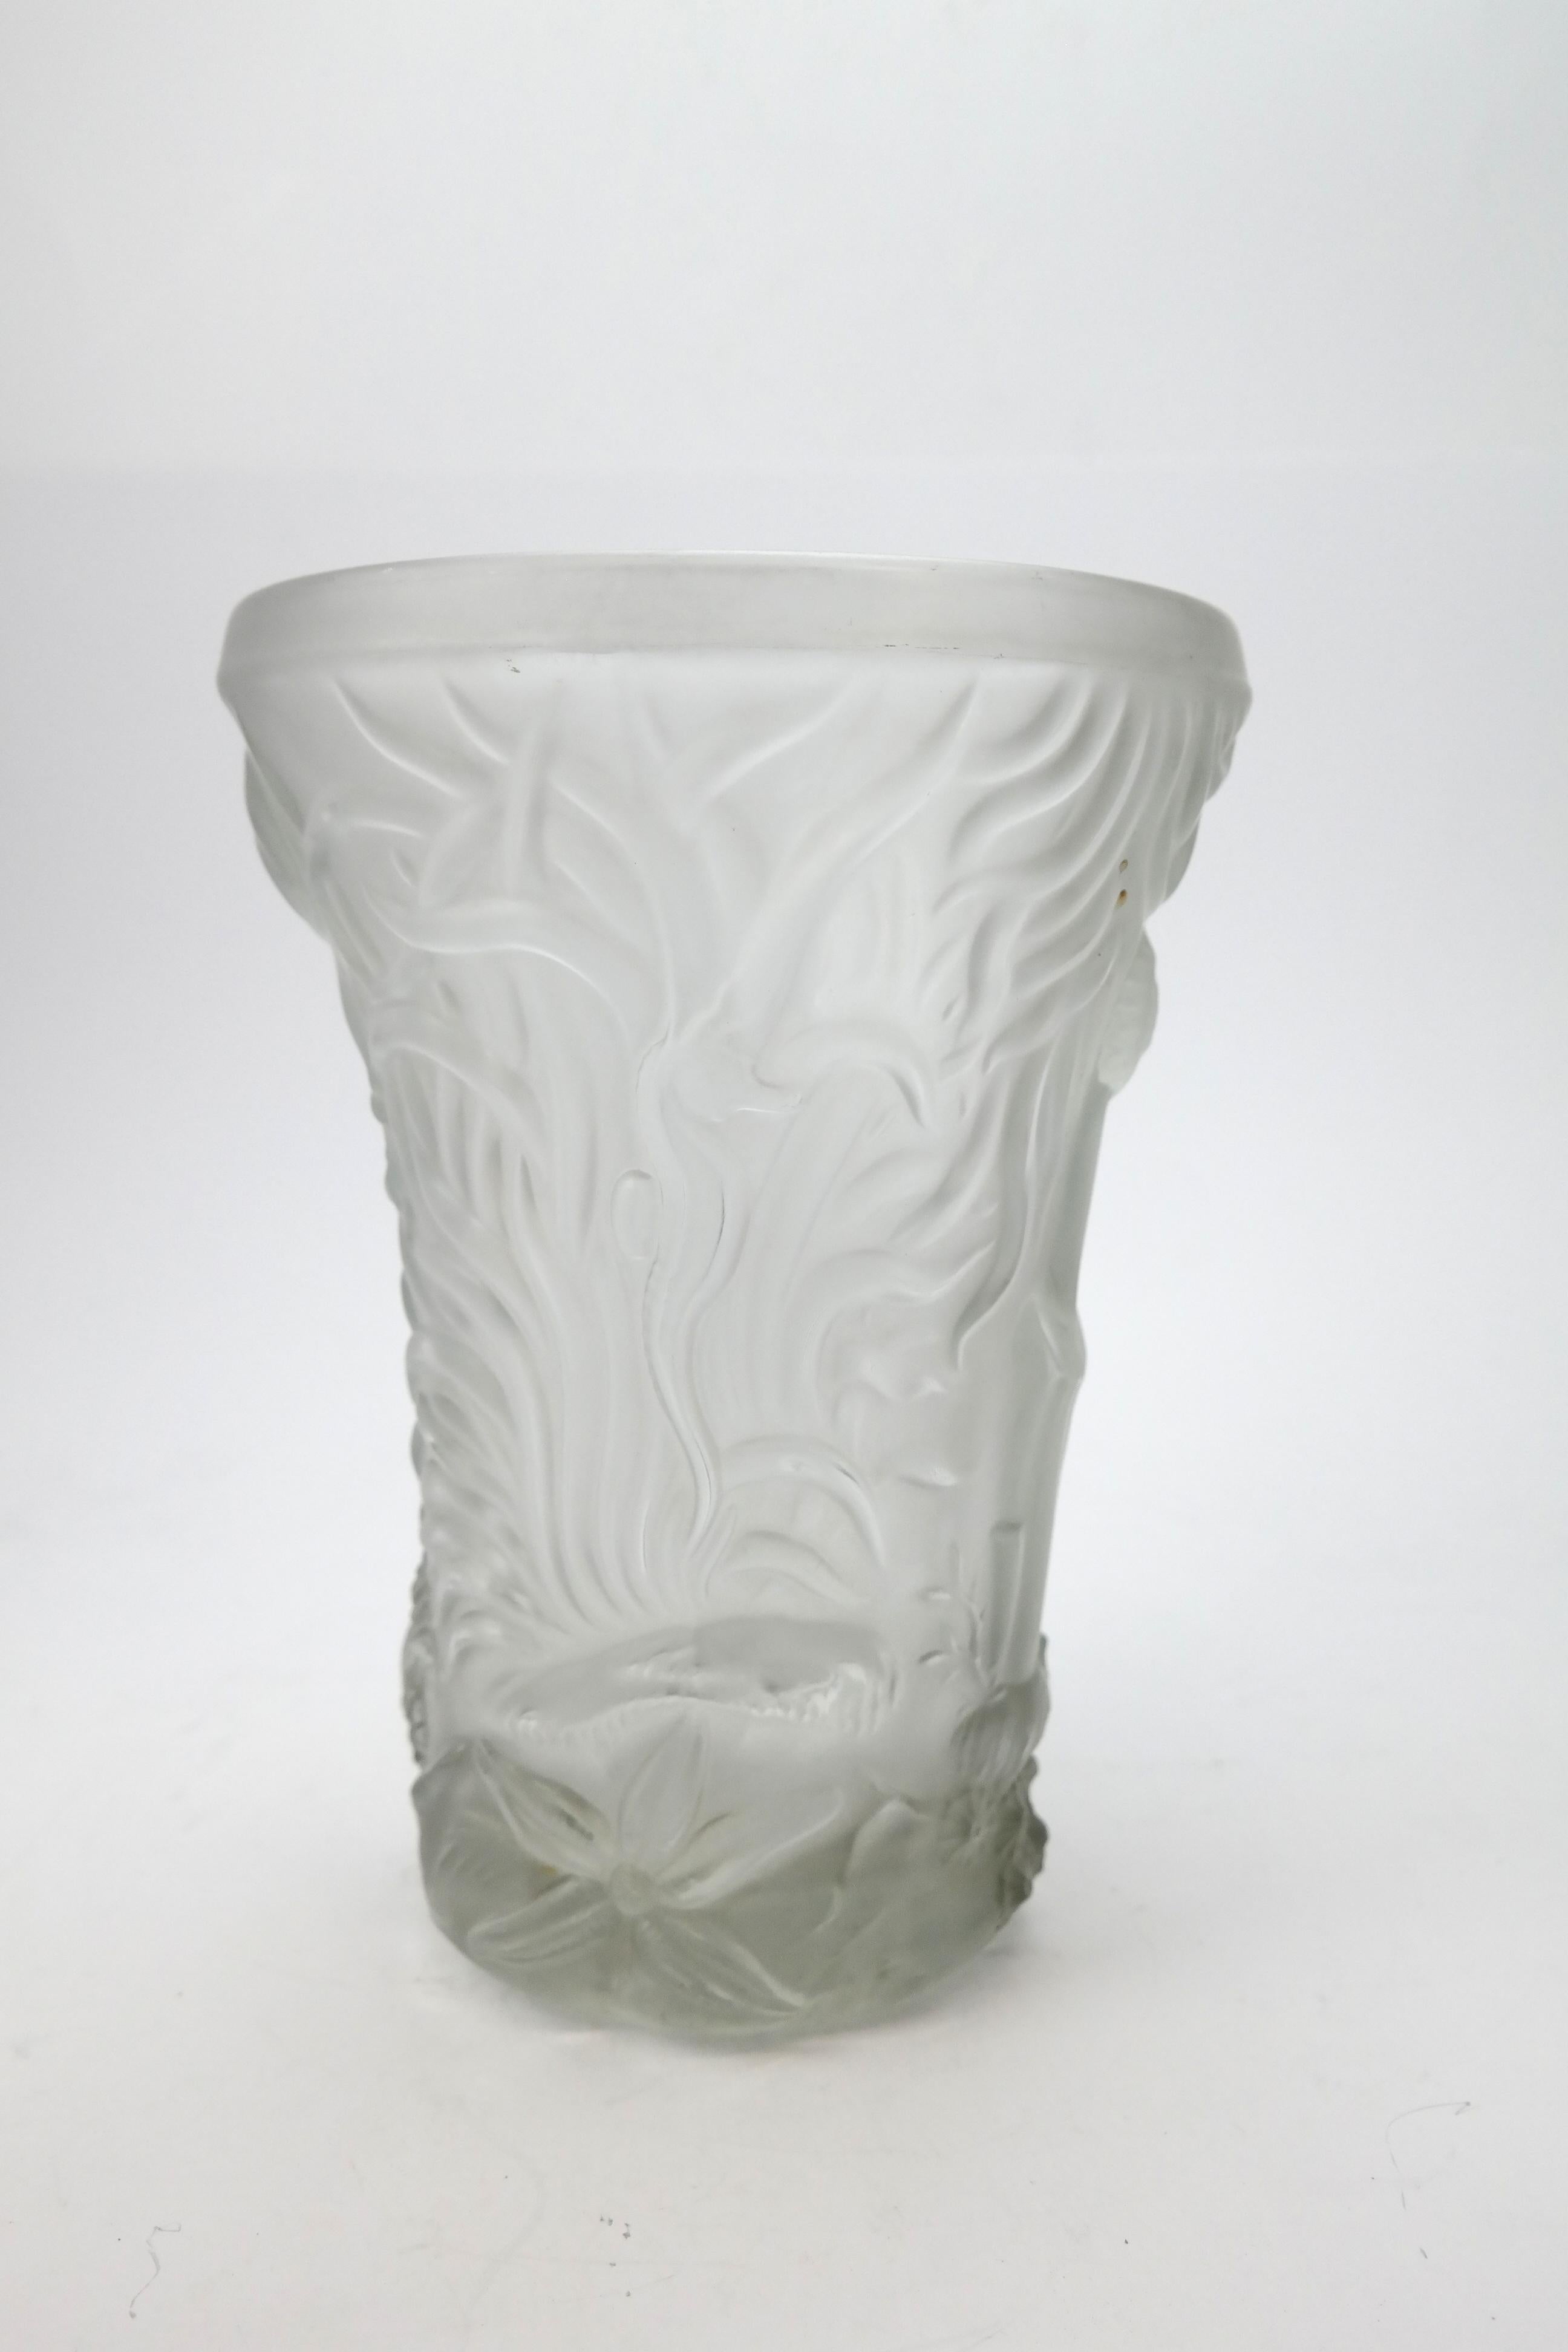 20th Century Art Deco Molded Pressed Glass Vase in Lalique Style